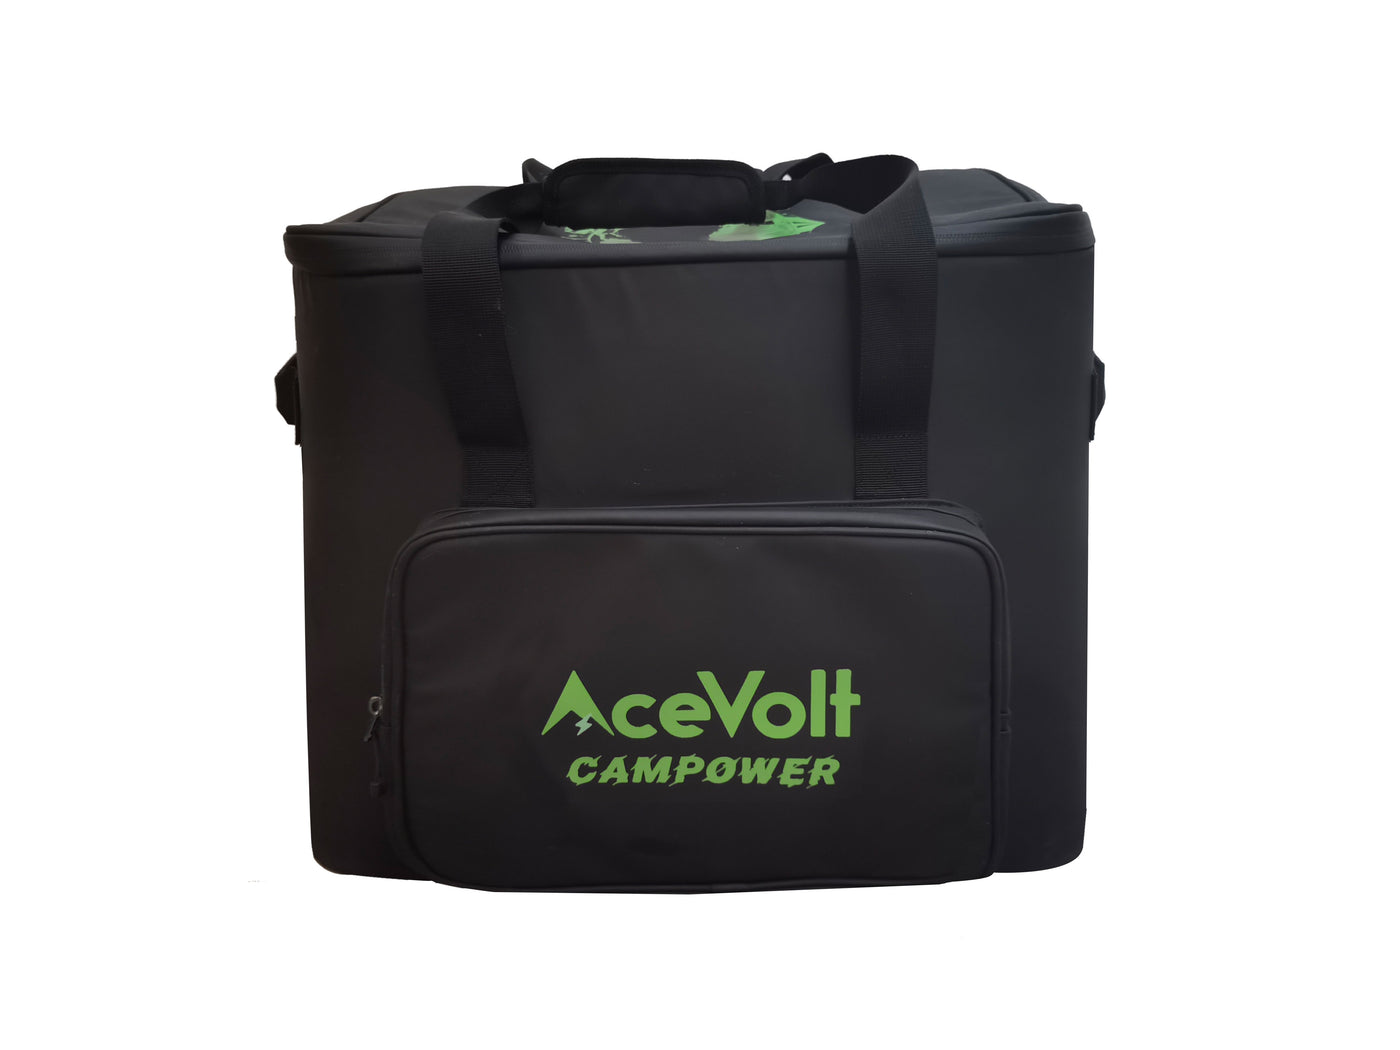 Campower 2000 Carrying Case Bag